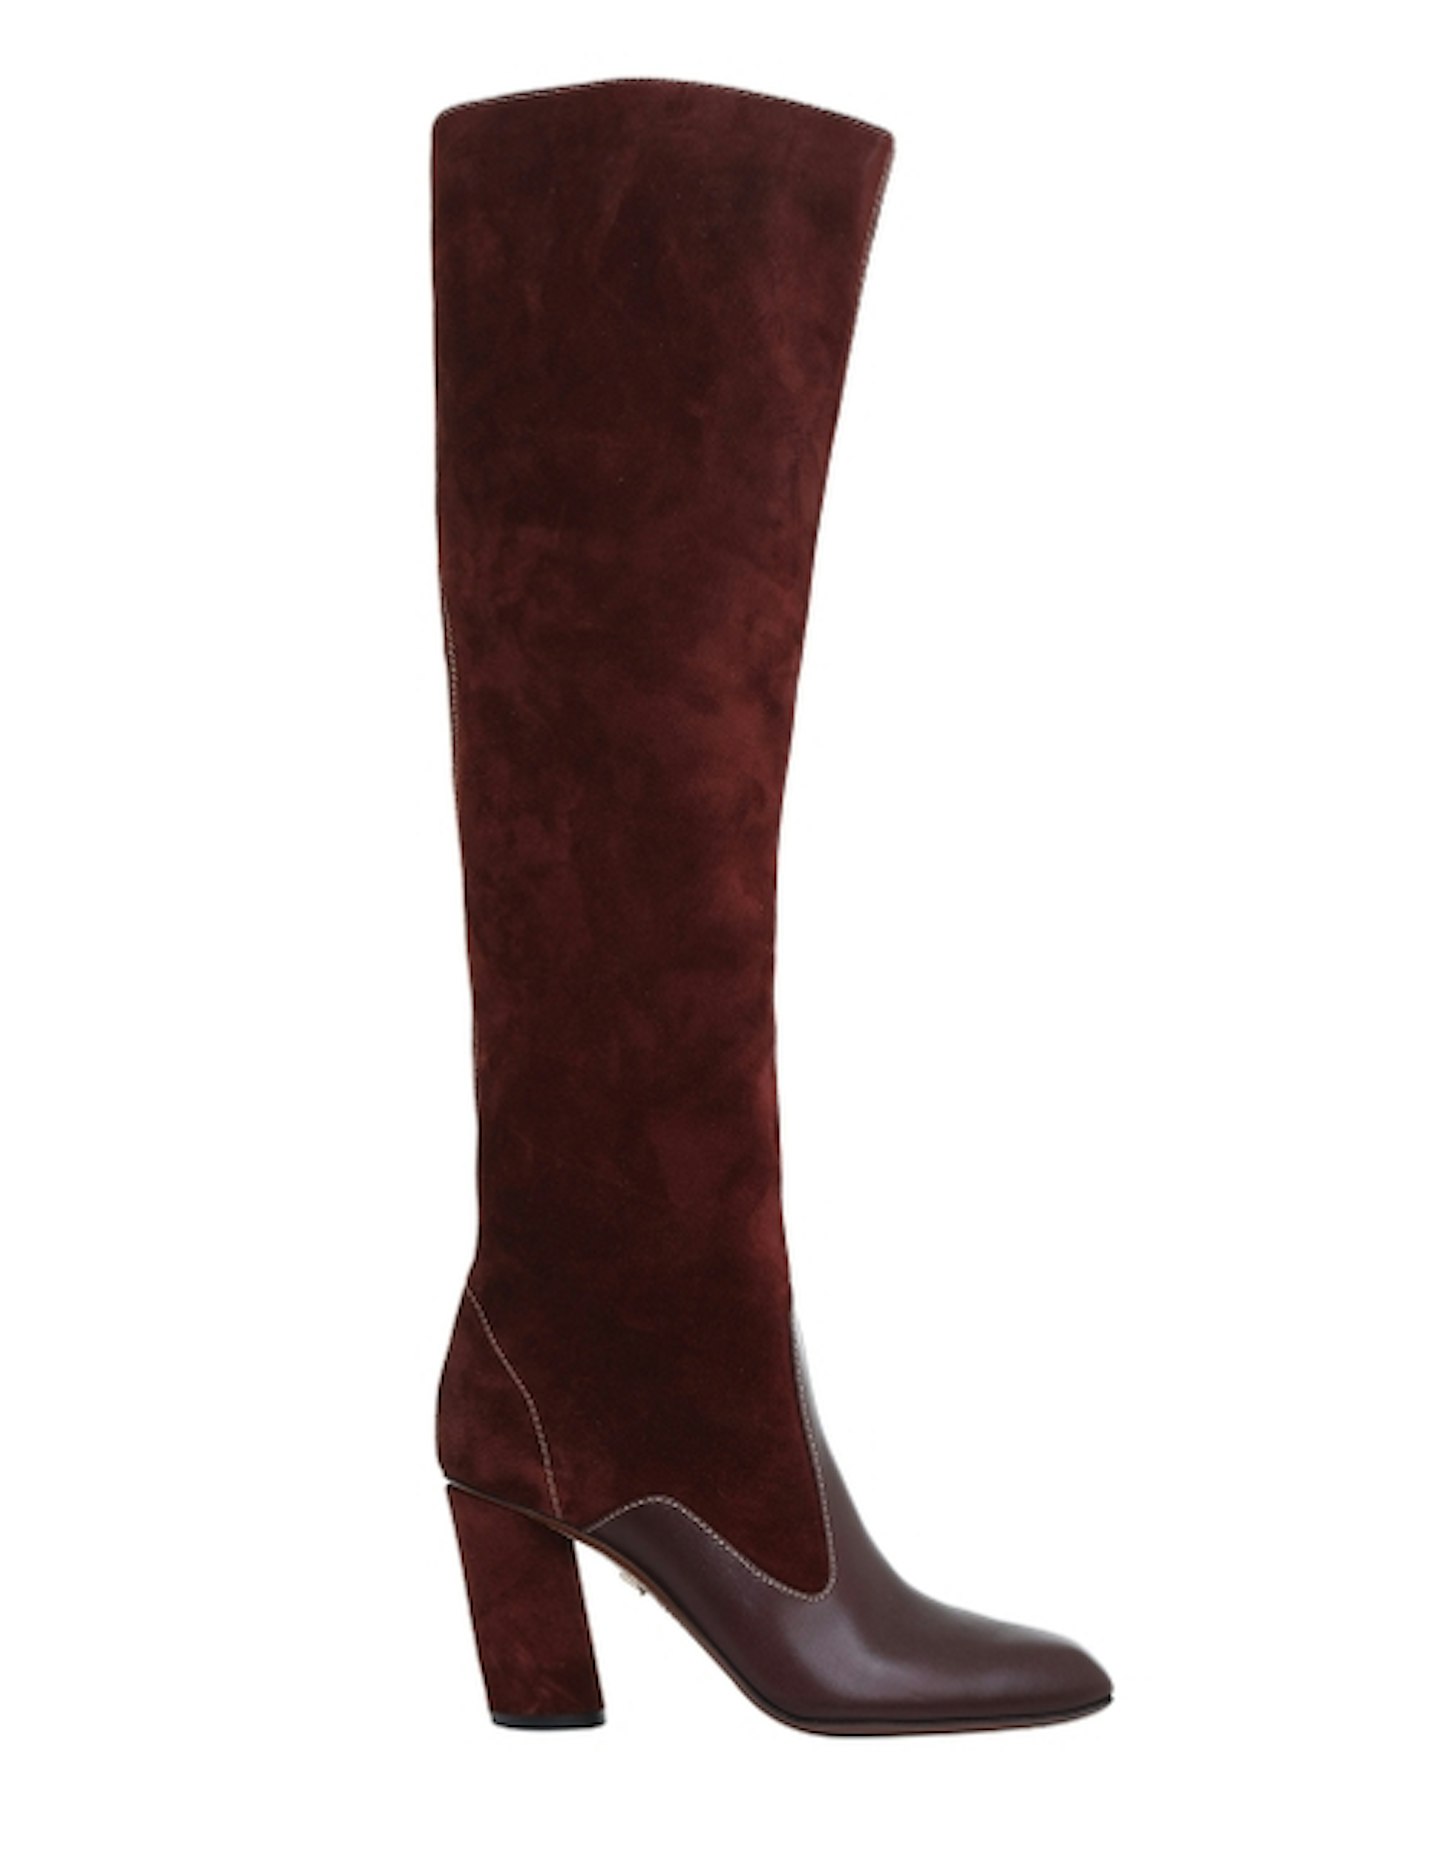 Zimmermann  Panelled Slouch Boot, £1,050